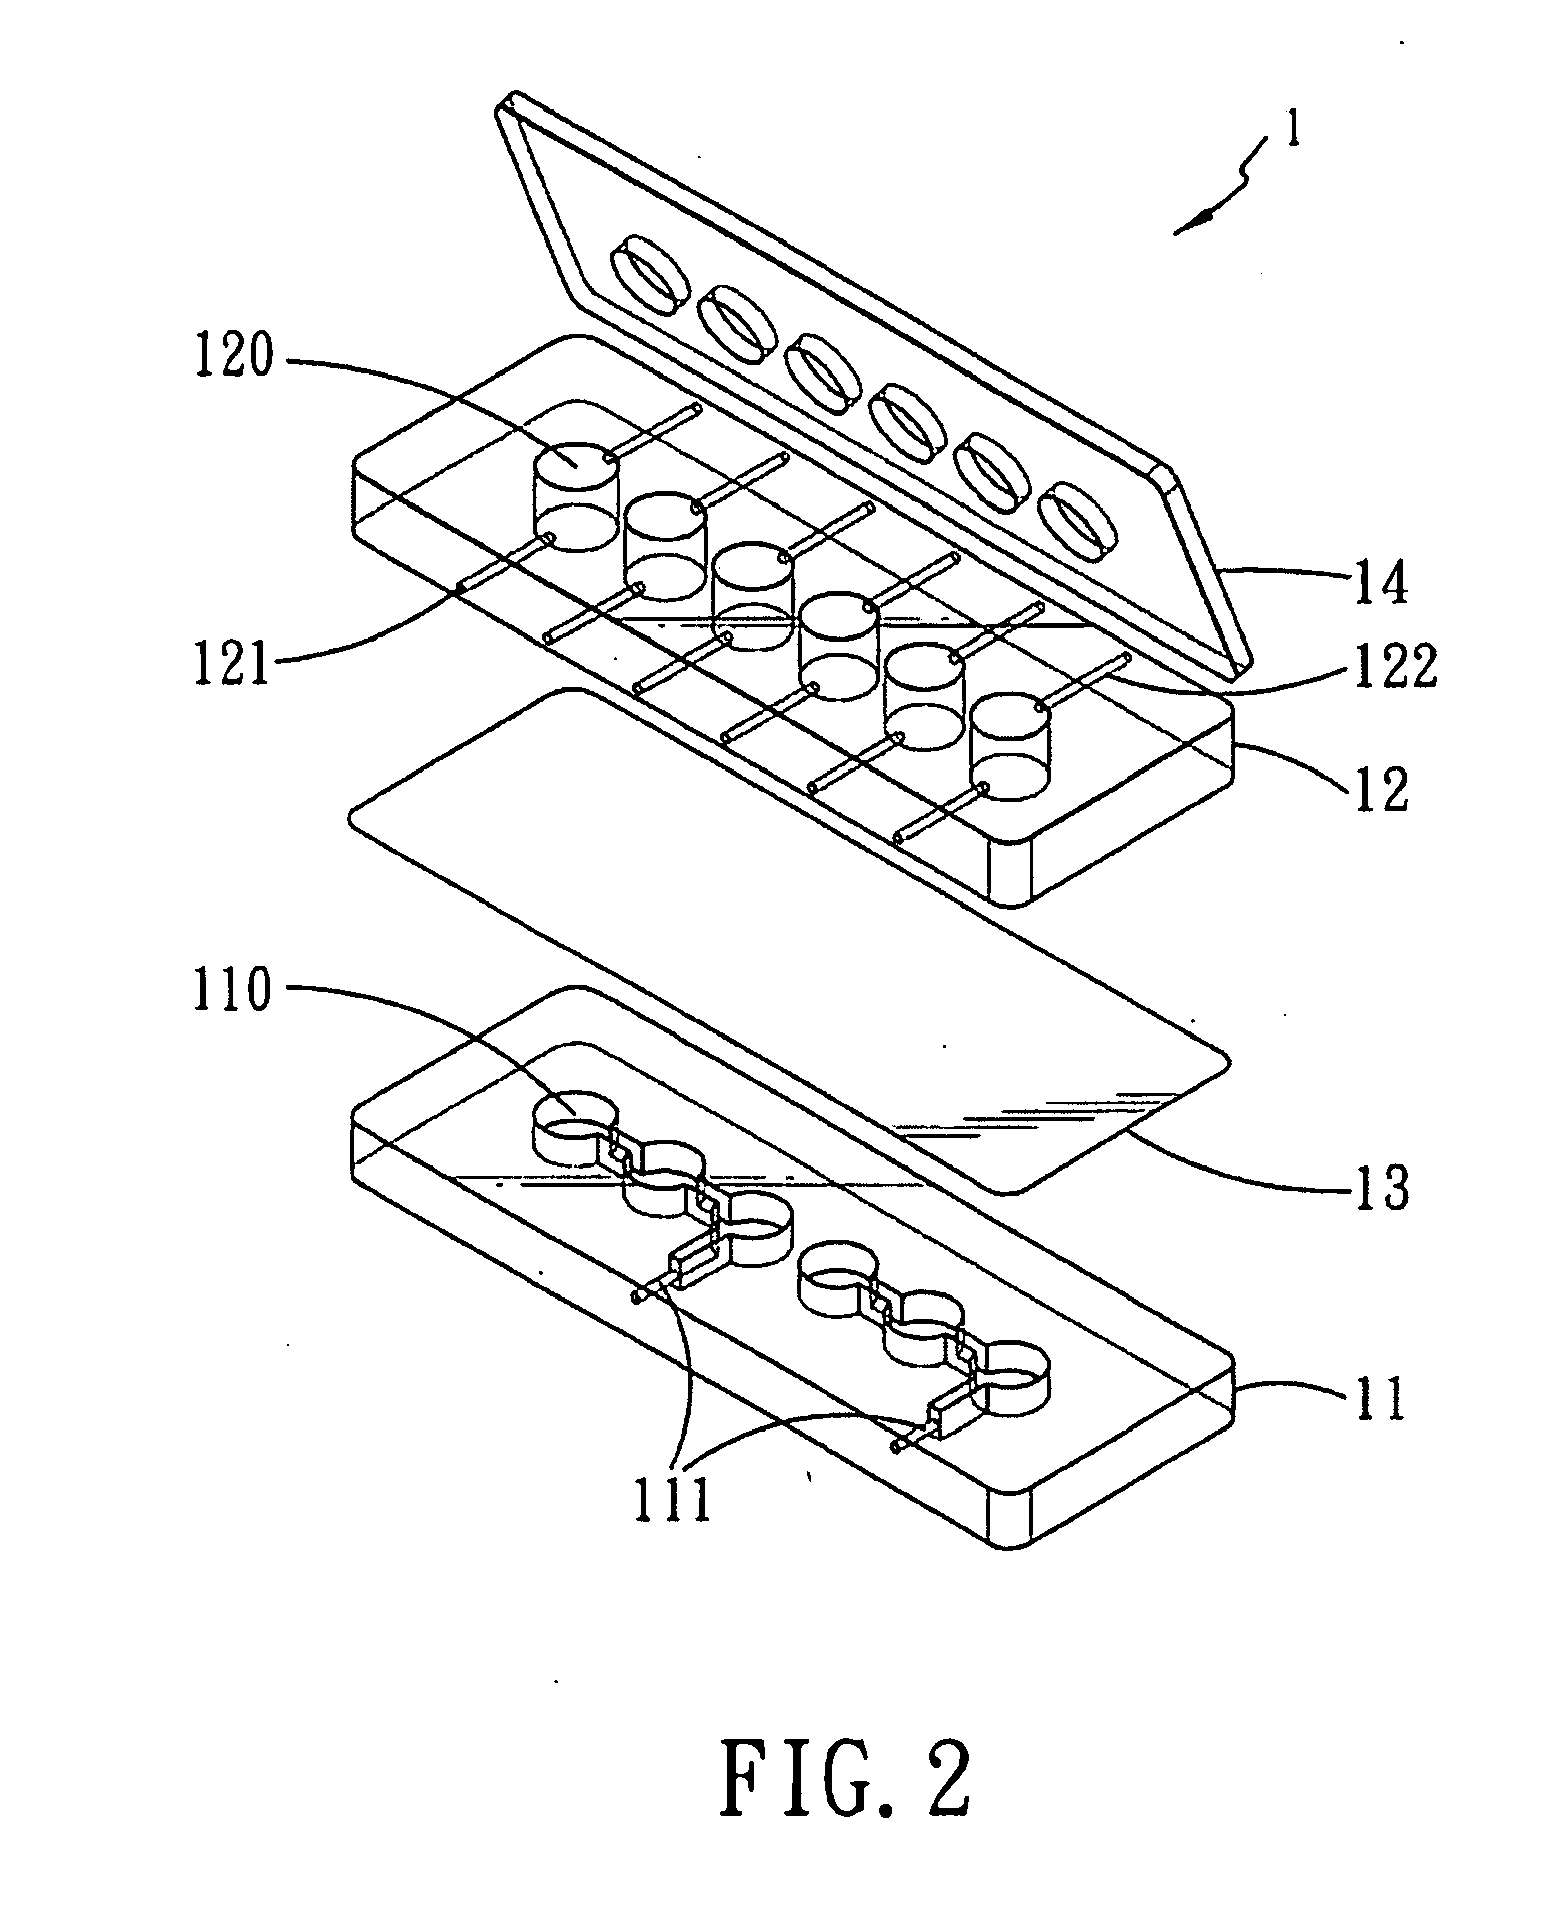 Apparatus and method for high-throughput micro-cell culture with mechanical stimulation